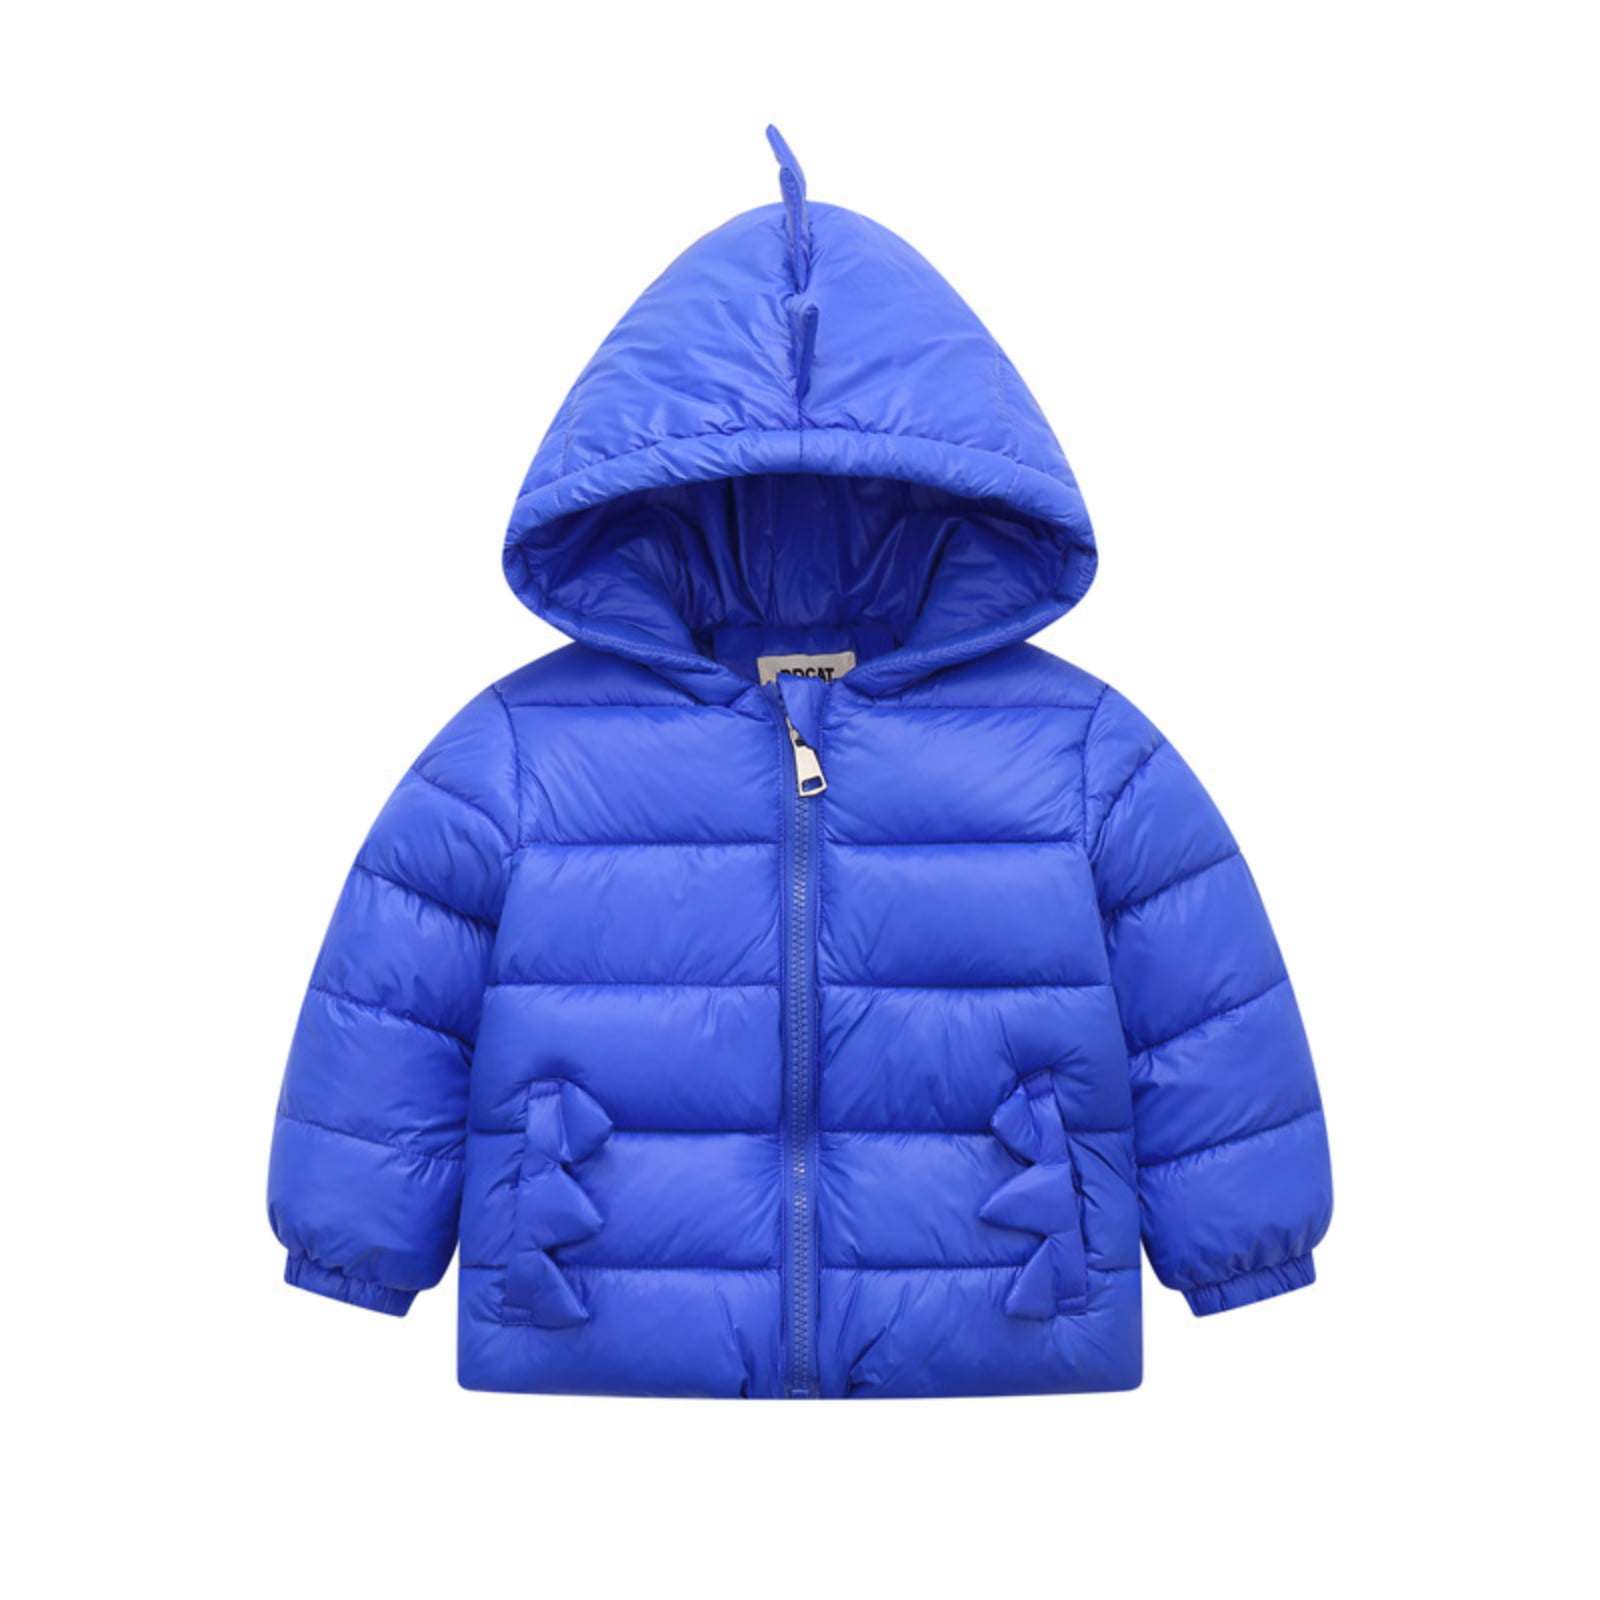 Boys Winter Coat Thick Warm Puffer Jacket Size 12-18M 90